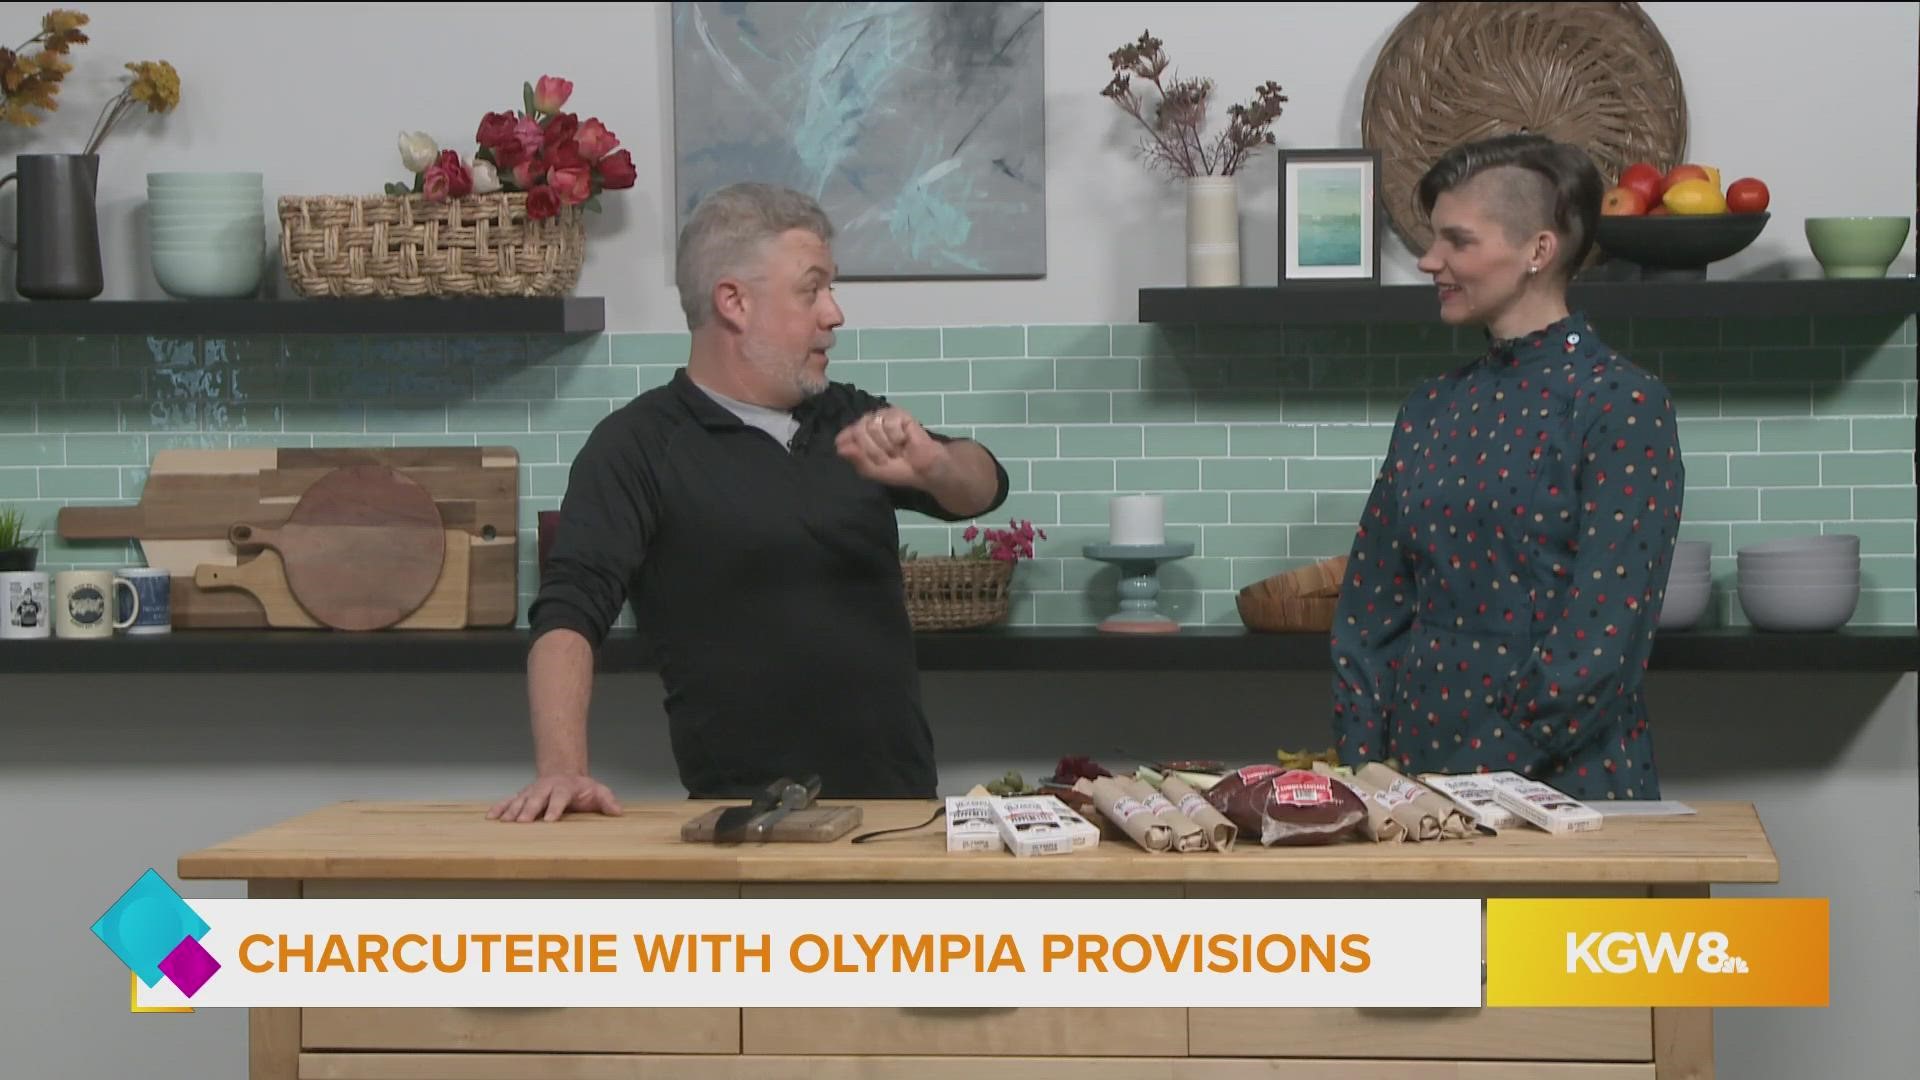 Olympia Provisions is a family owned and operated business based in Portland